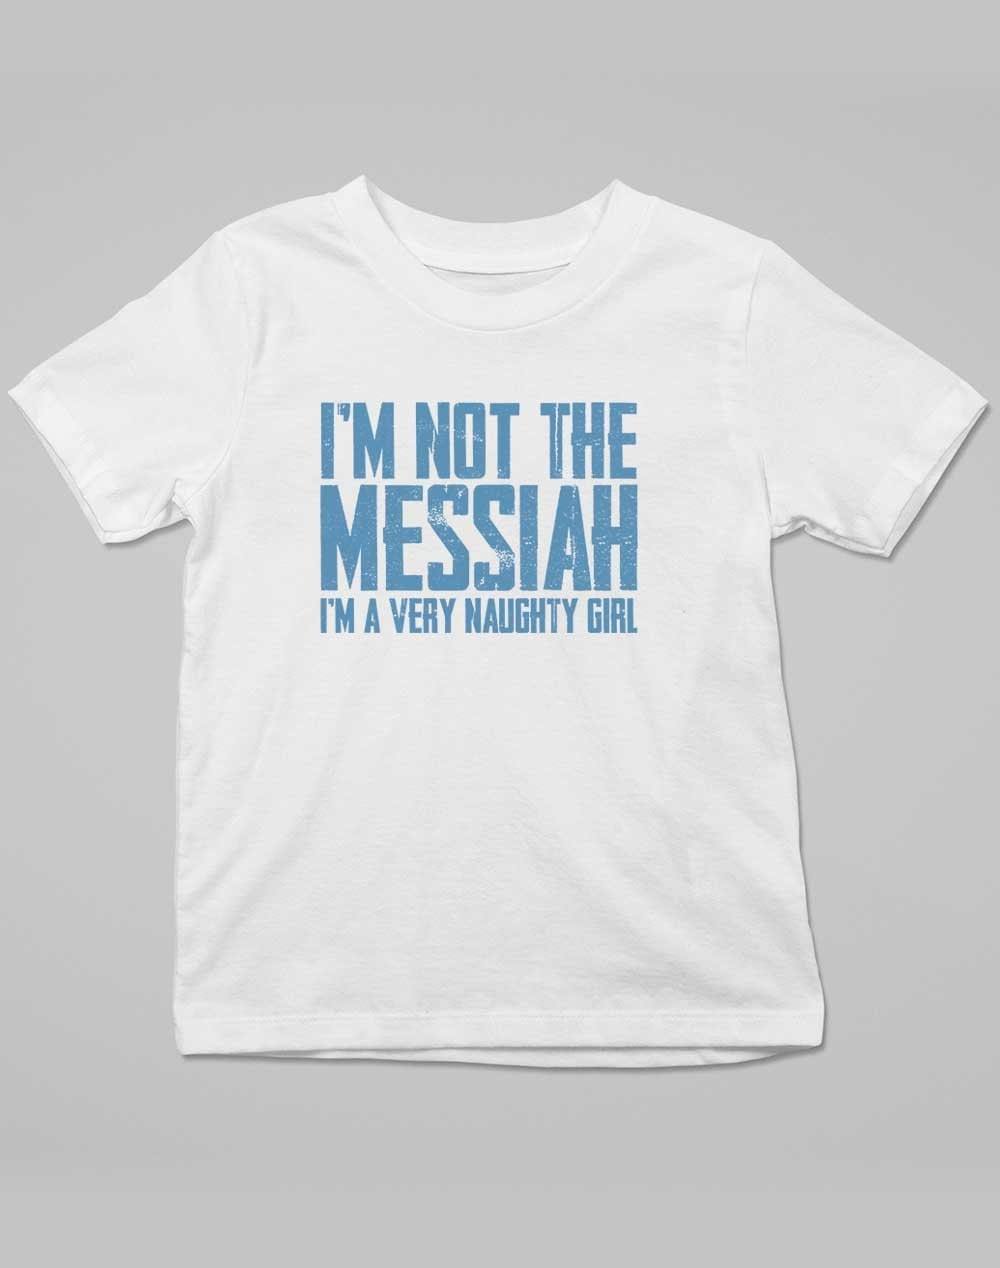 I'm Not the Messiah I'm a Very Naughty Girl Kids T-Shirt 3-4 years / White  - Off World Tees